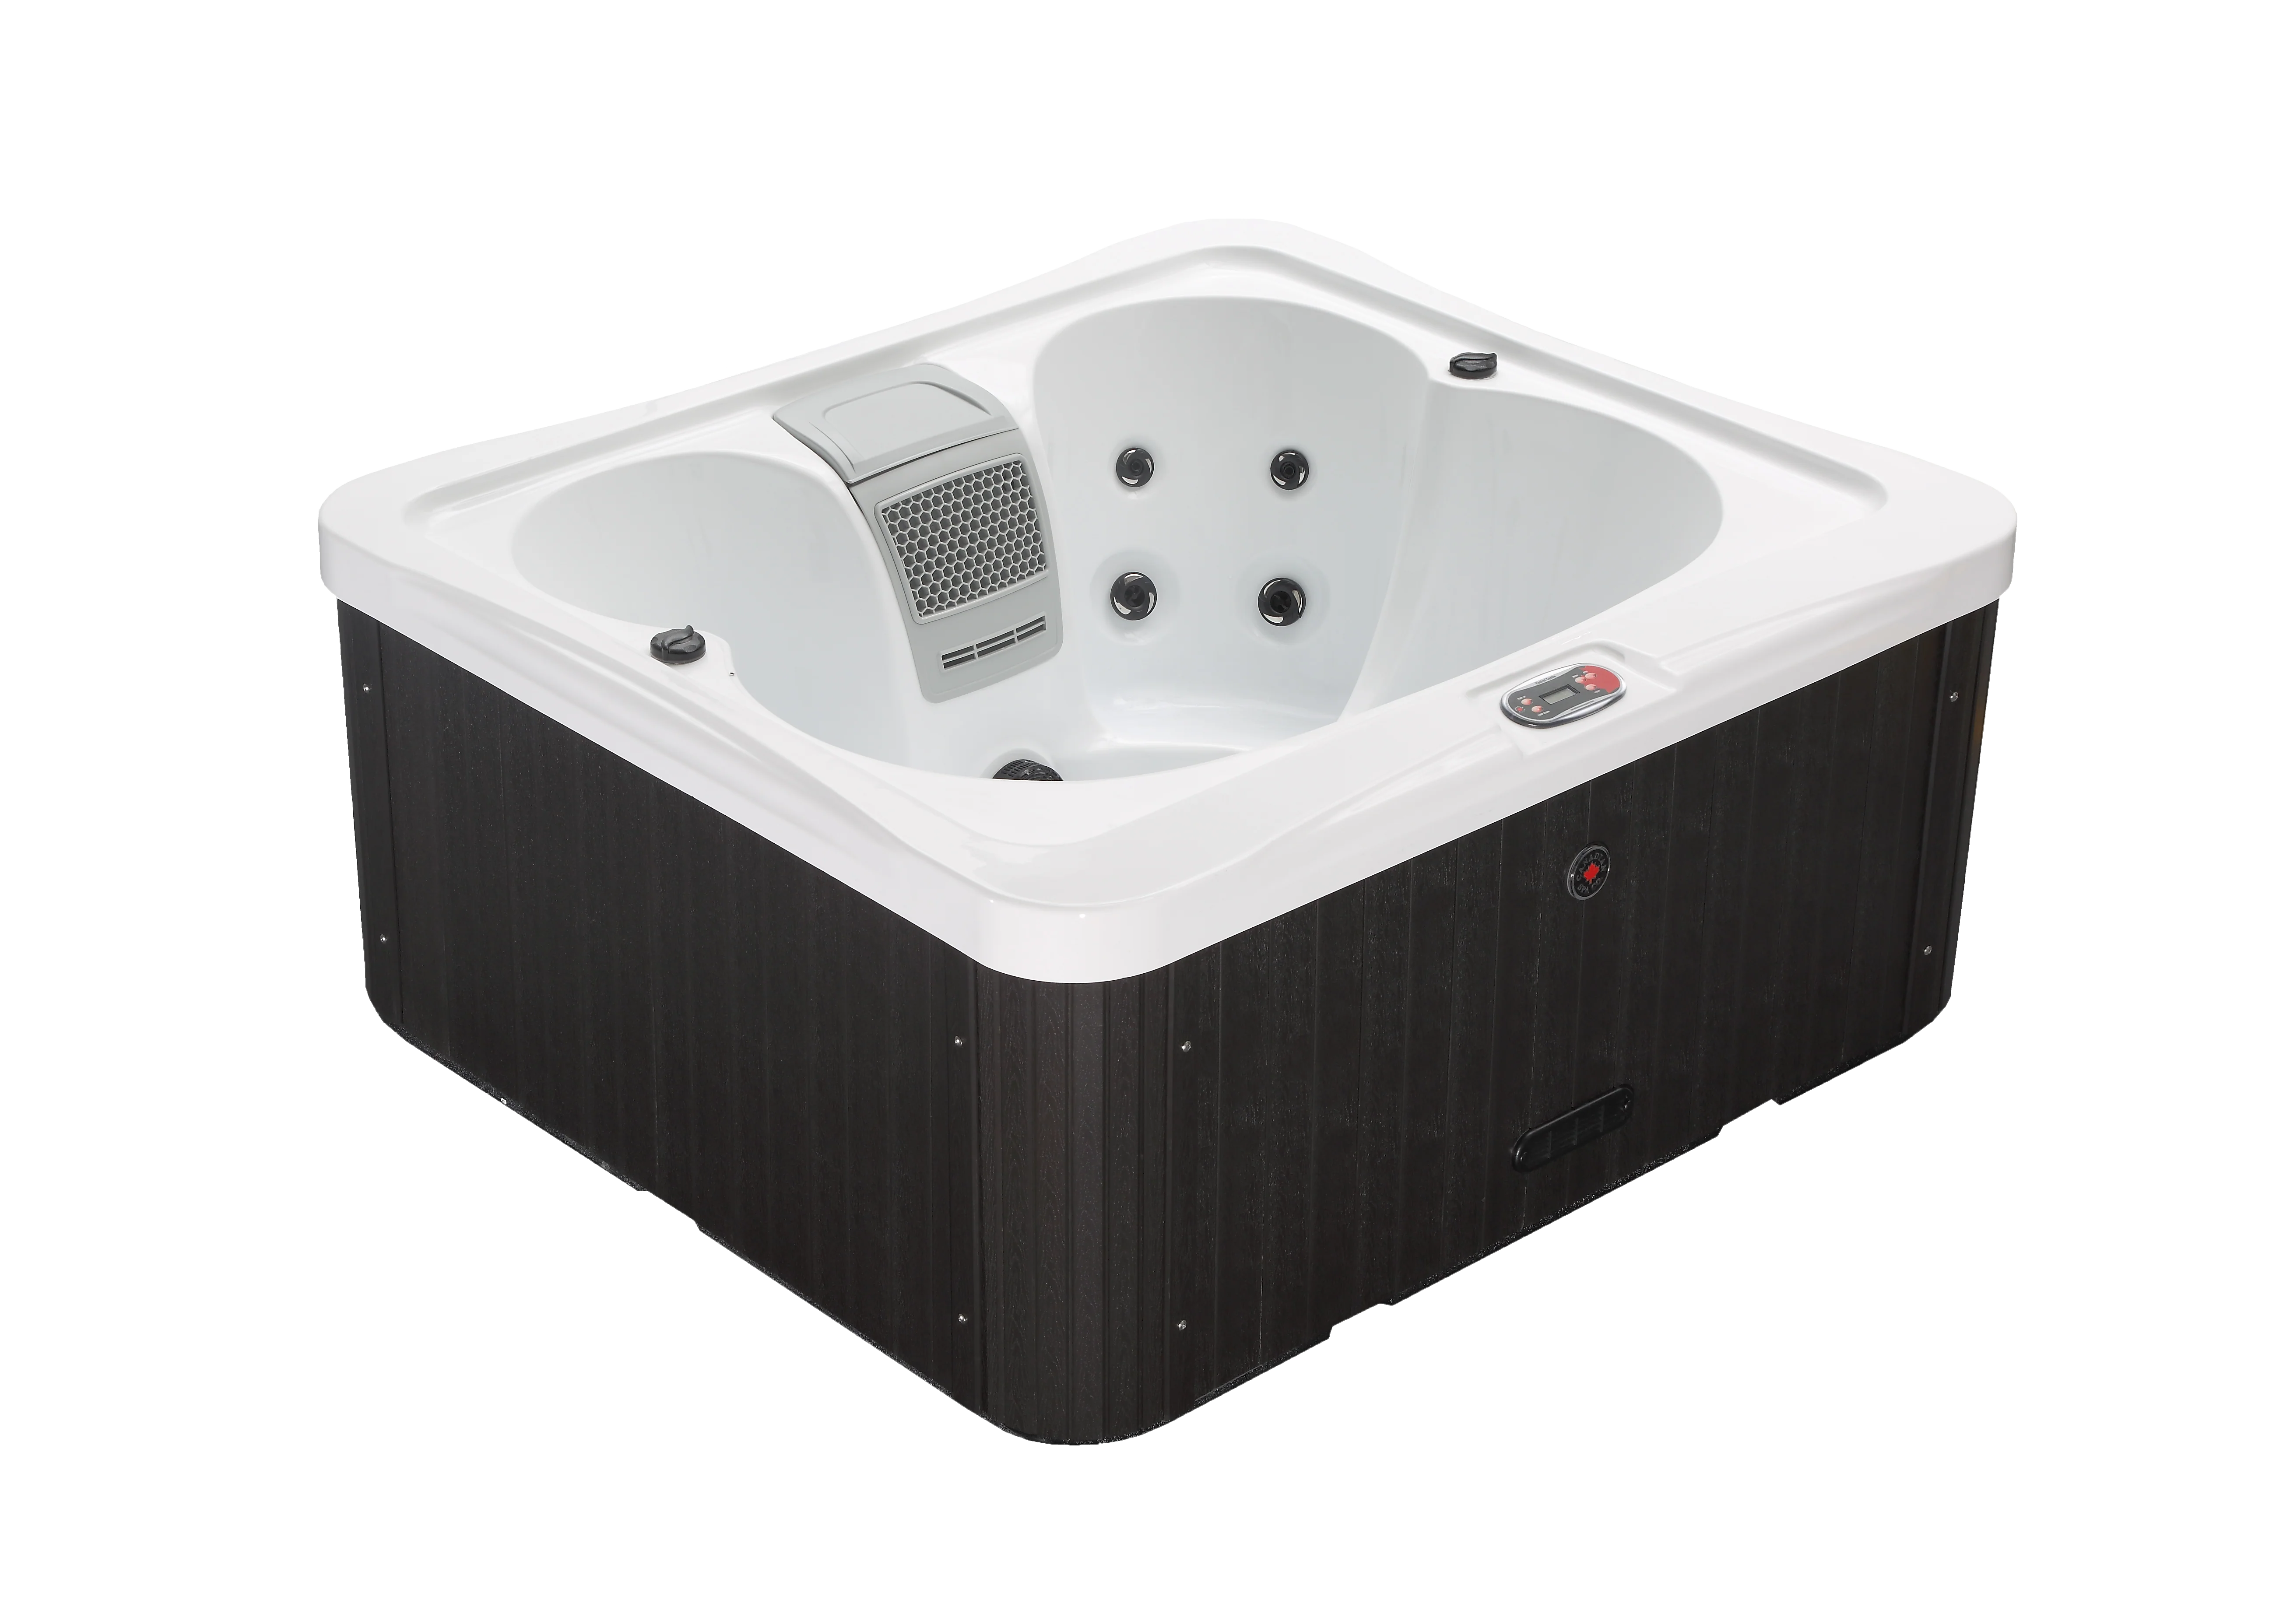 Canadian Spa Co. Granby 4-Person 15-Jet Portable Hot Tub